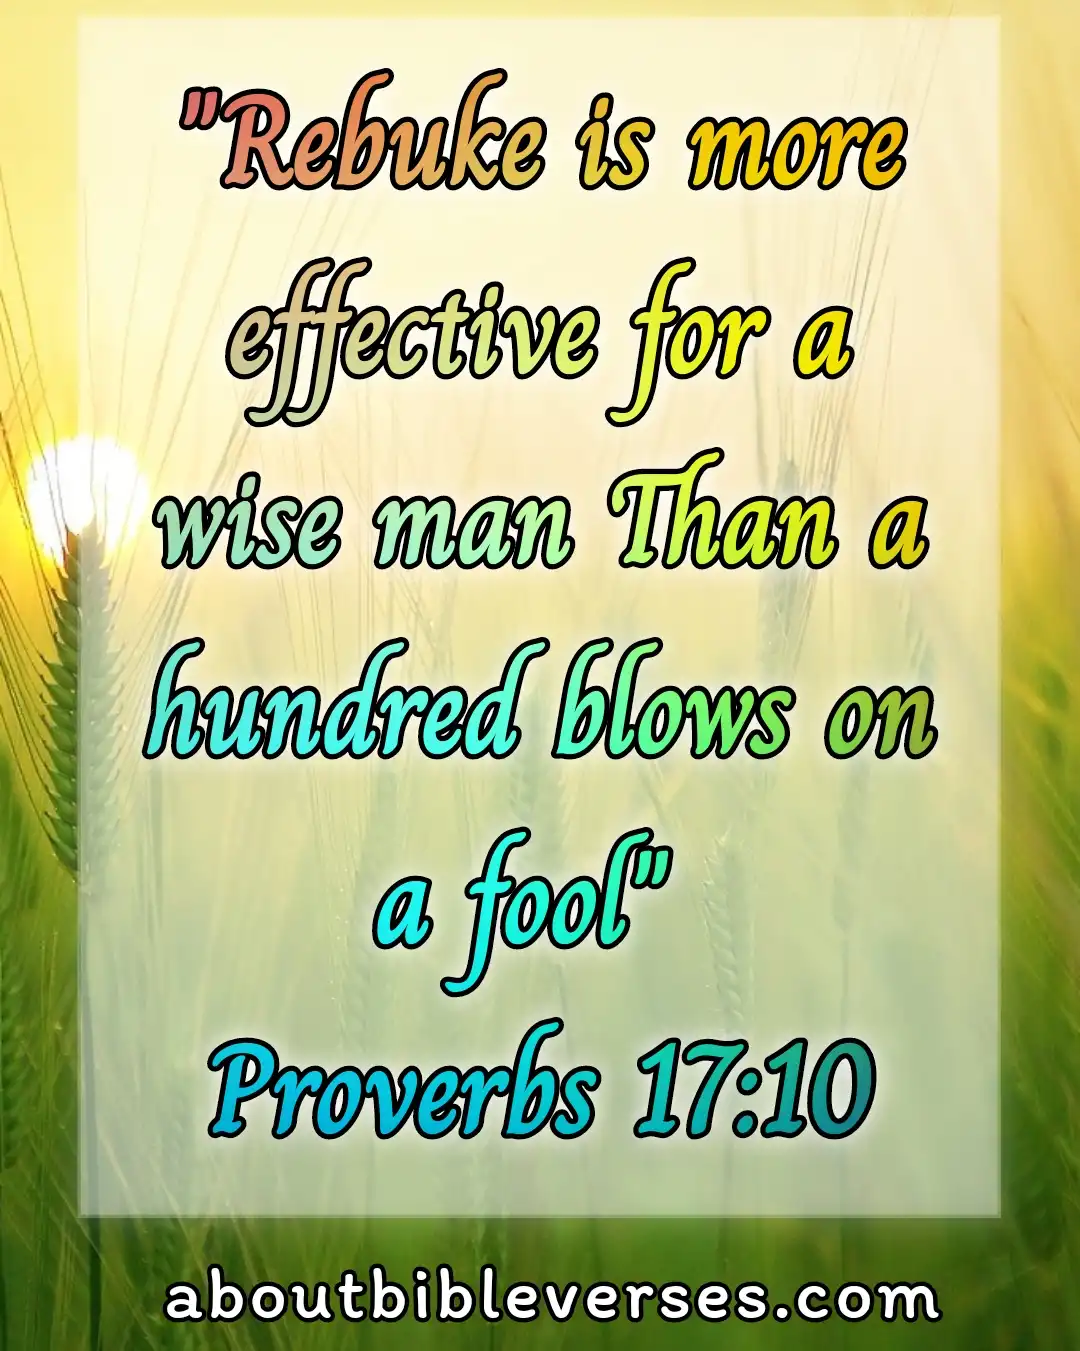 bible verses about wisdom (Proverbs 17:10)